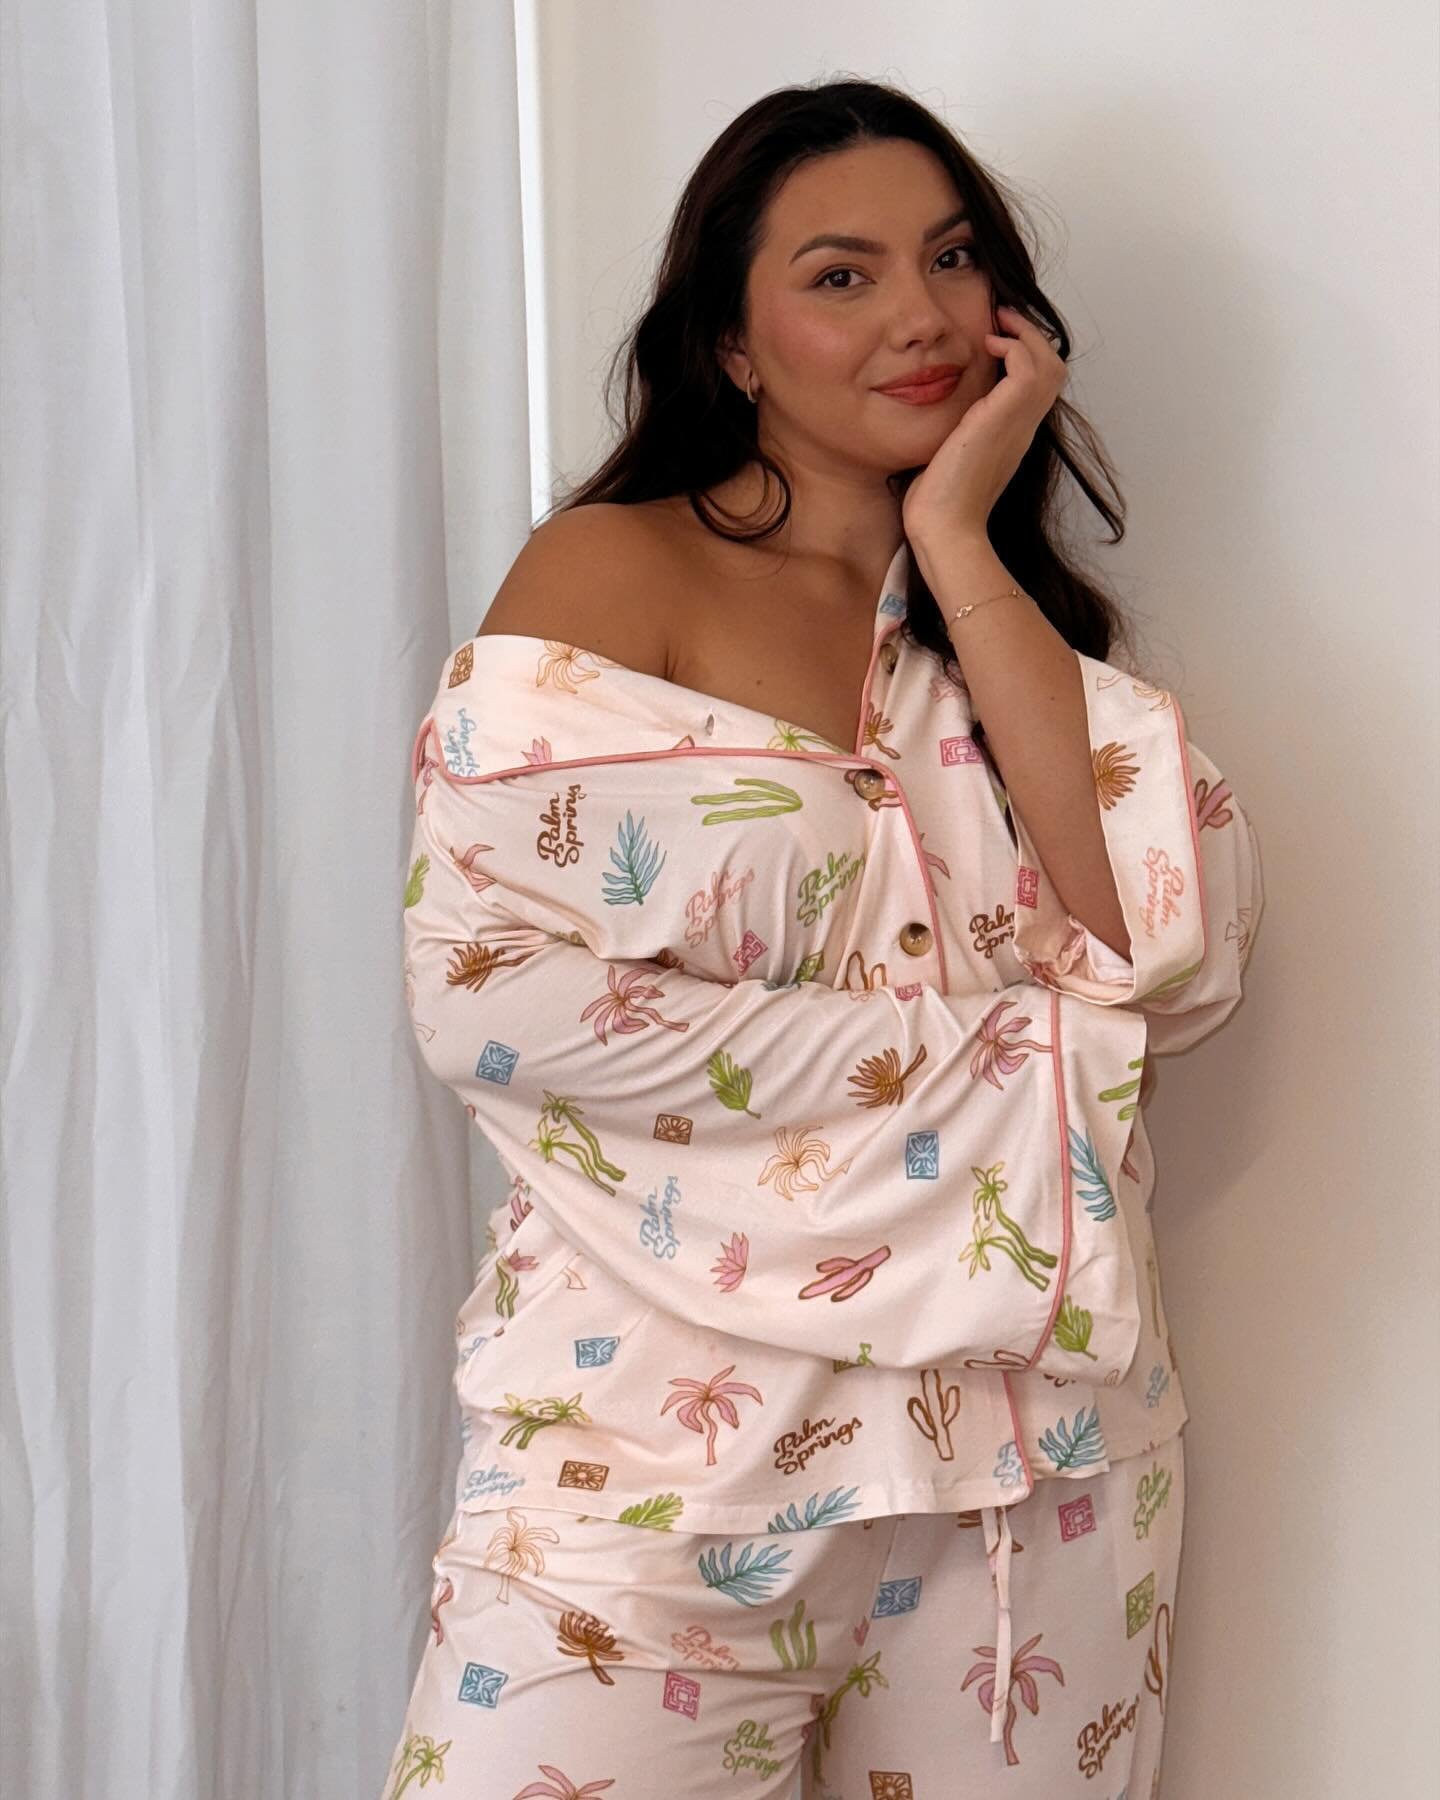 Palm Springs 🌵 Congrats on the first ever pj&rsquo;s @lullabyclub ! Of course they are as soft as butter and are extremely pretty&hellip;. These wouldn&rsquo;t be the worst Mother&rsquo;s Day gift ;) 

*Kindly gifted

#pyjamas #brisbanefashion #bris